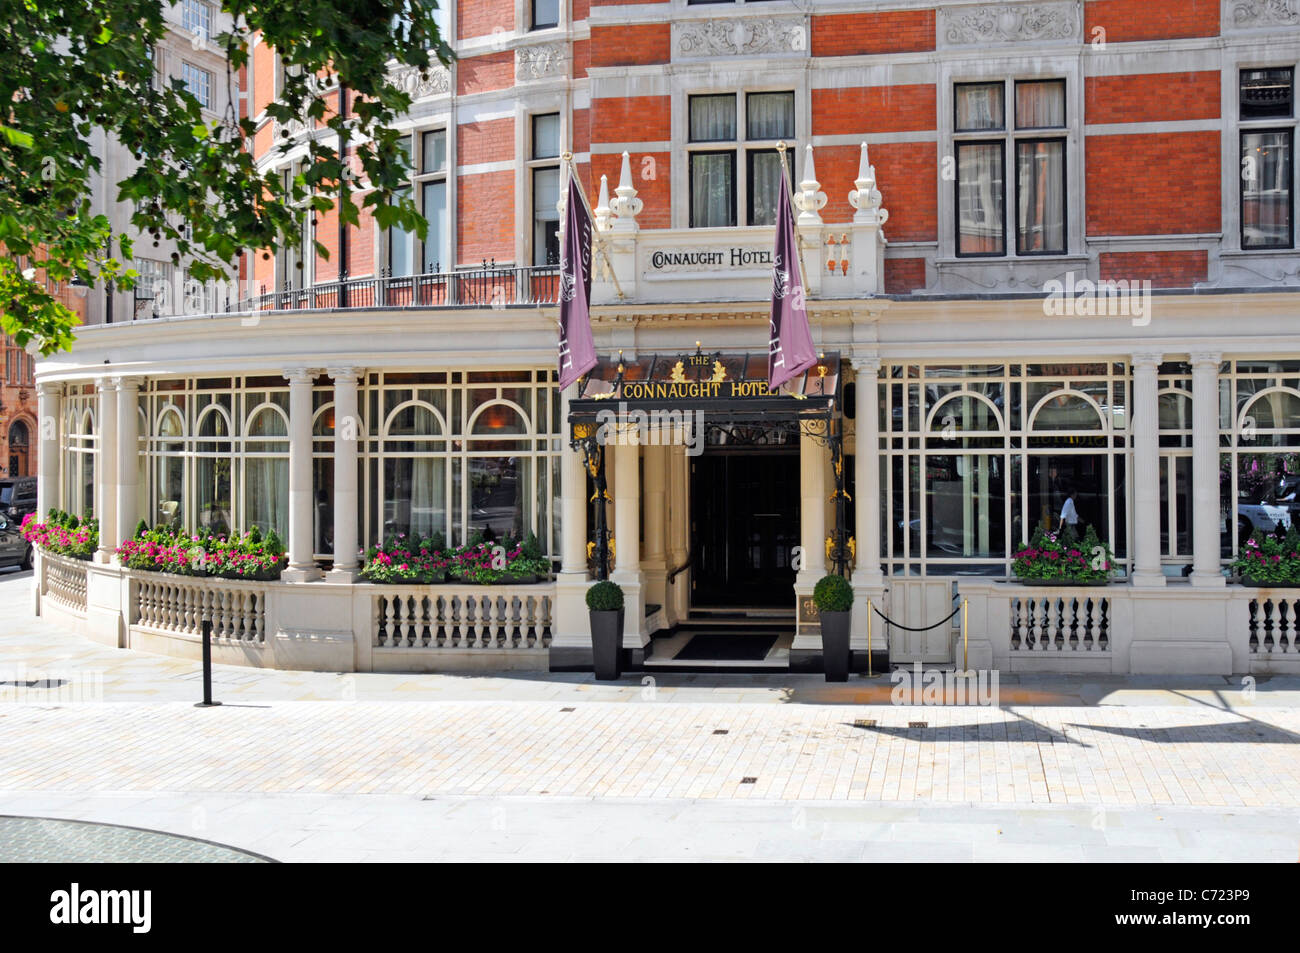 The Victorian five-star luxury Connaught Hotel front entrance and façade Mayfair London England UK Stock Photo